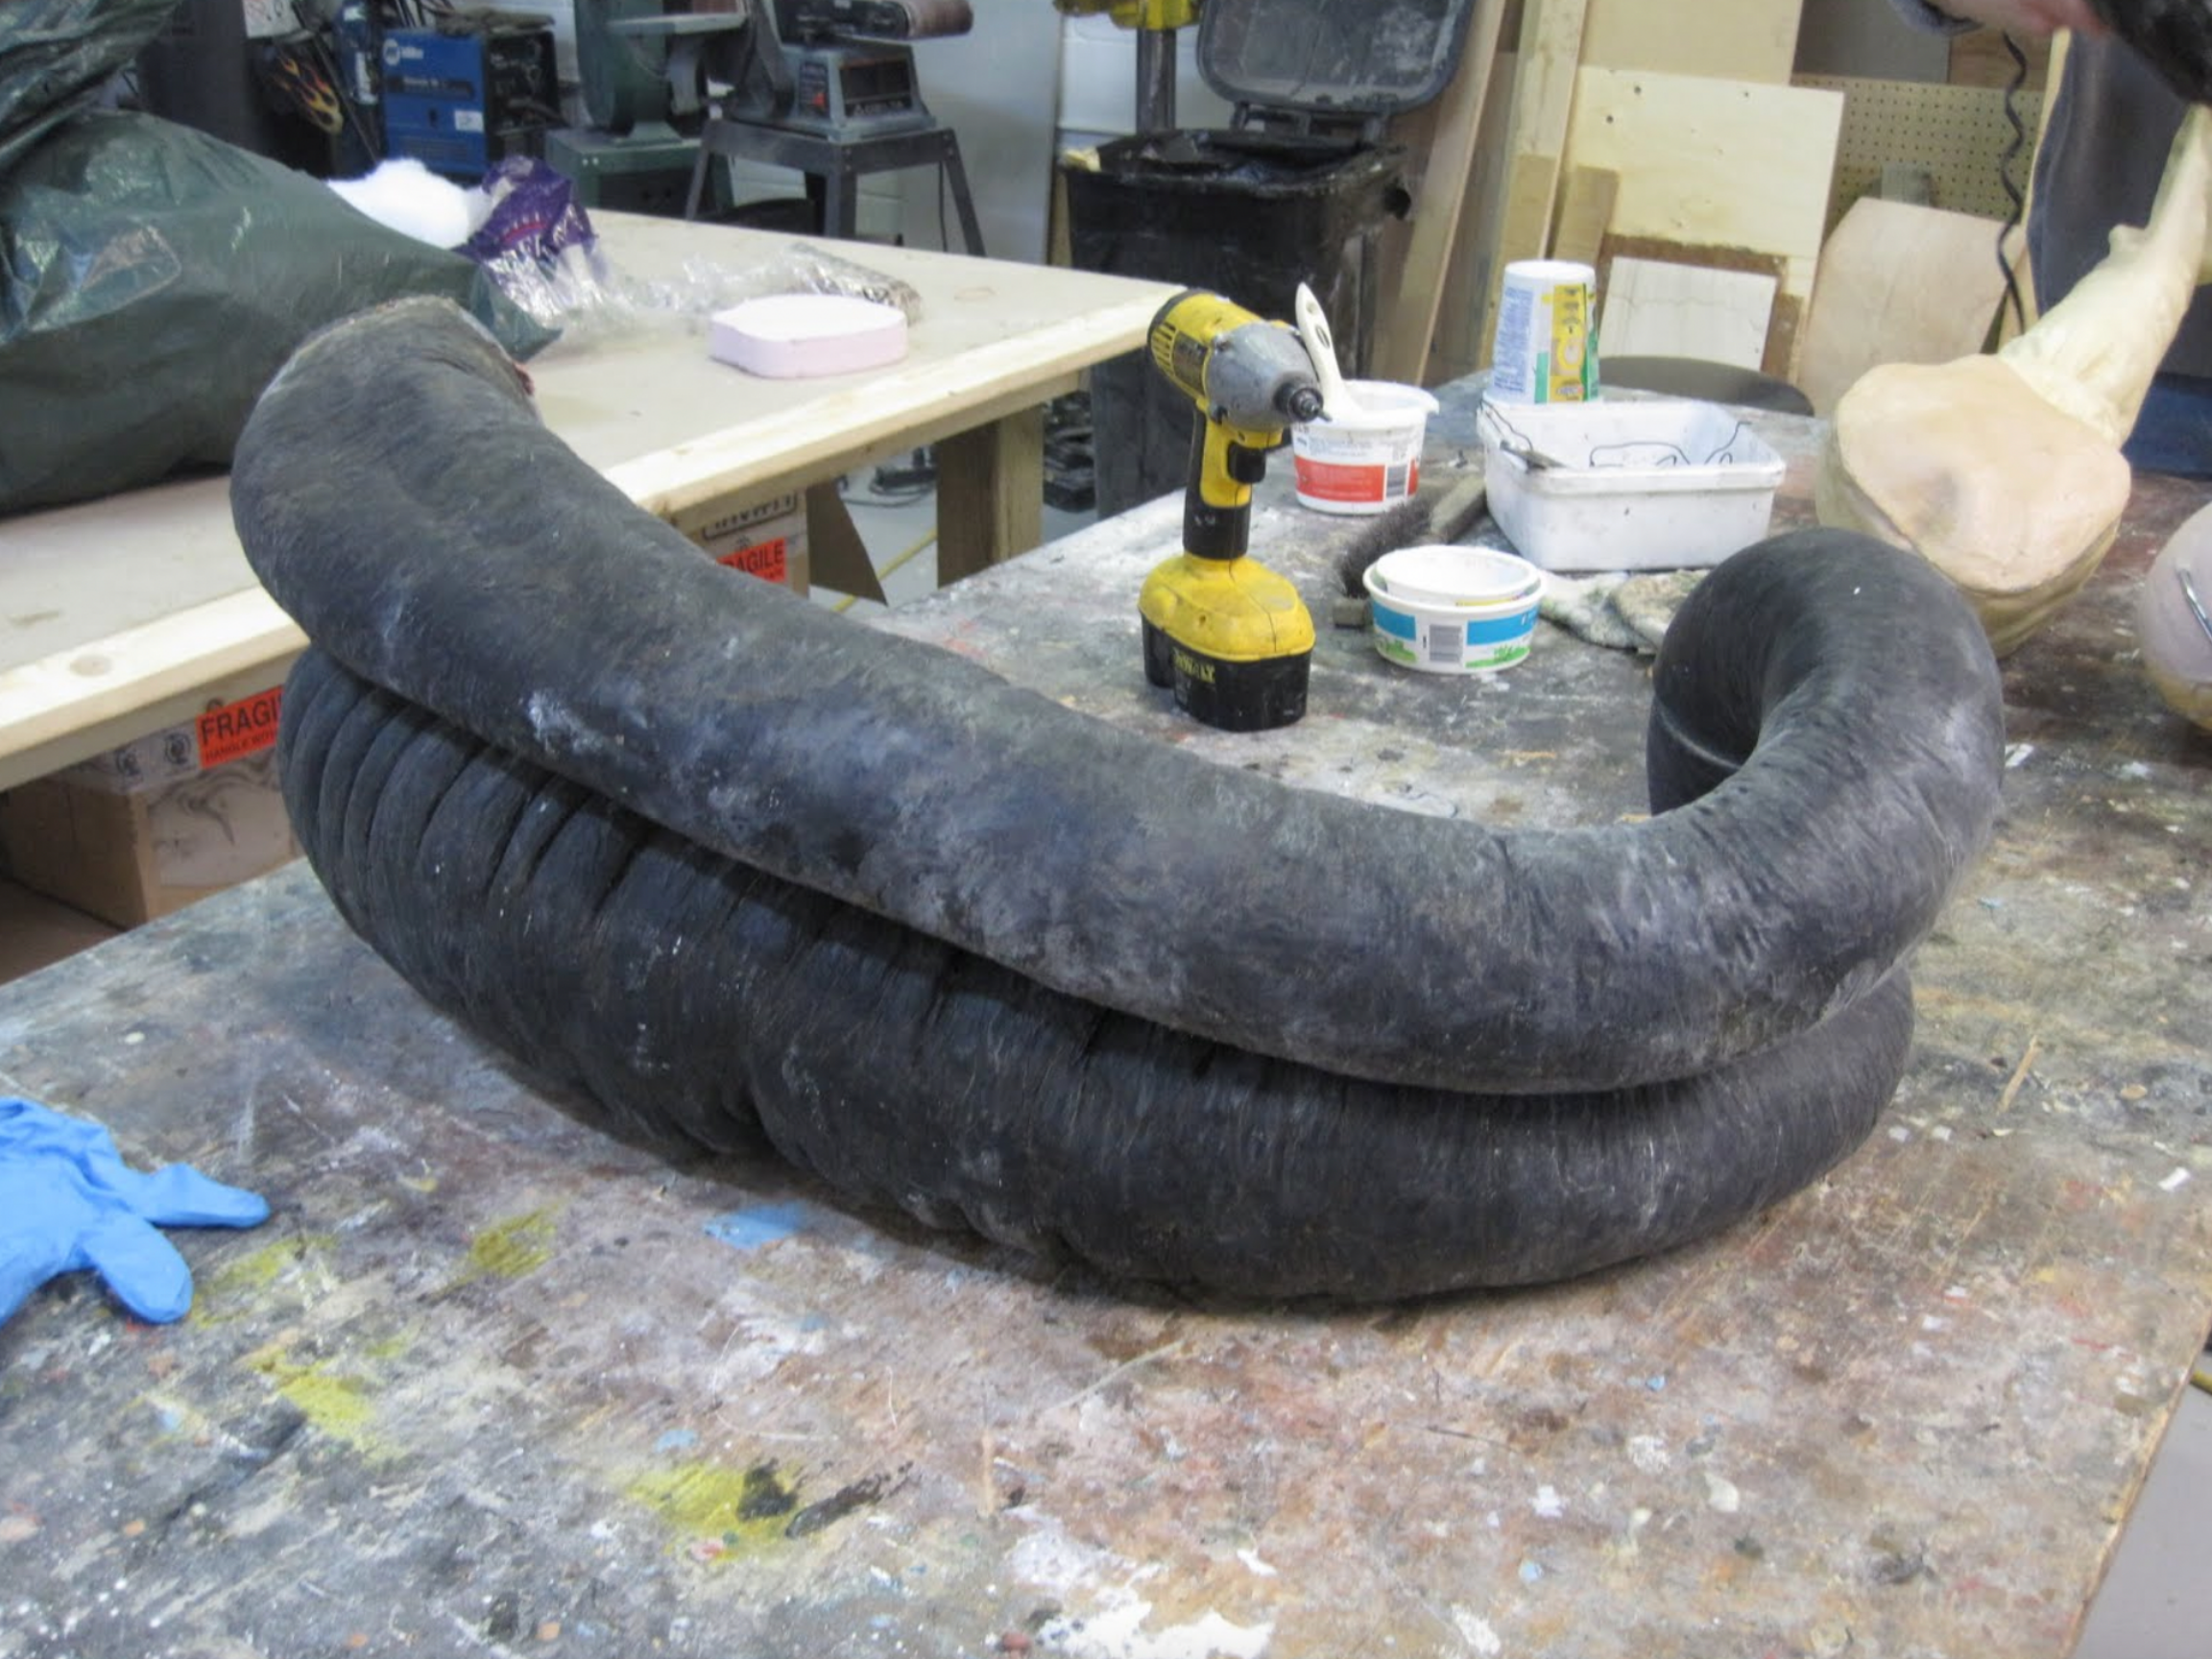  This photo shows the core of a portion the equine large intestine. It will be used to make a reproduction of the colon to simulate equine colic. the entire equine colon will be reproduced including the secum and a portion of the small intestine. 